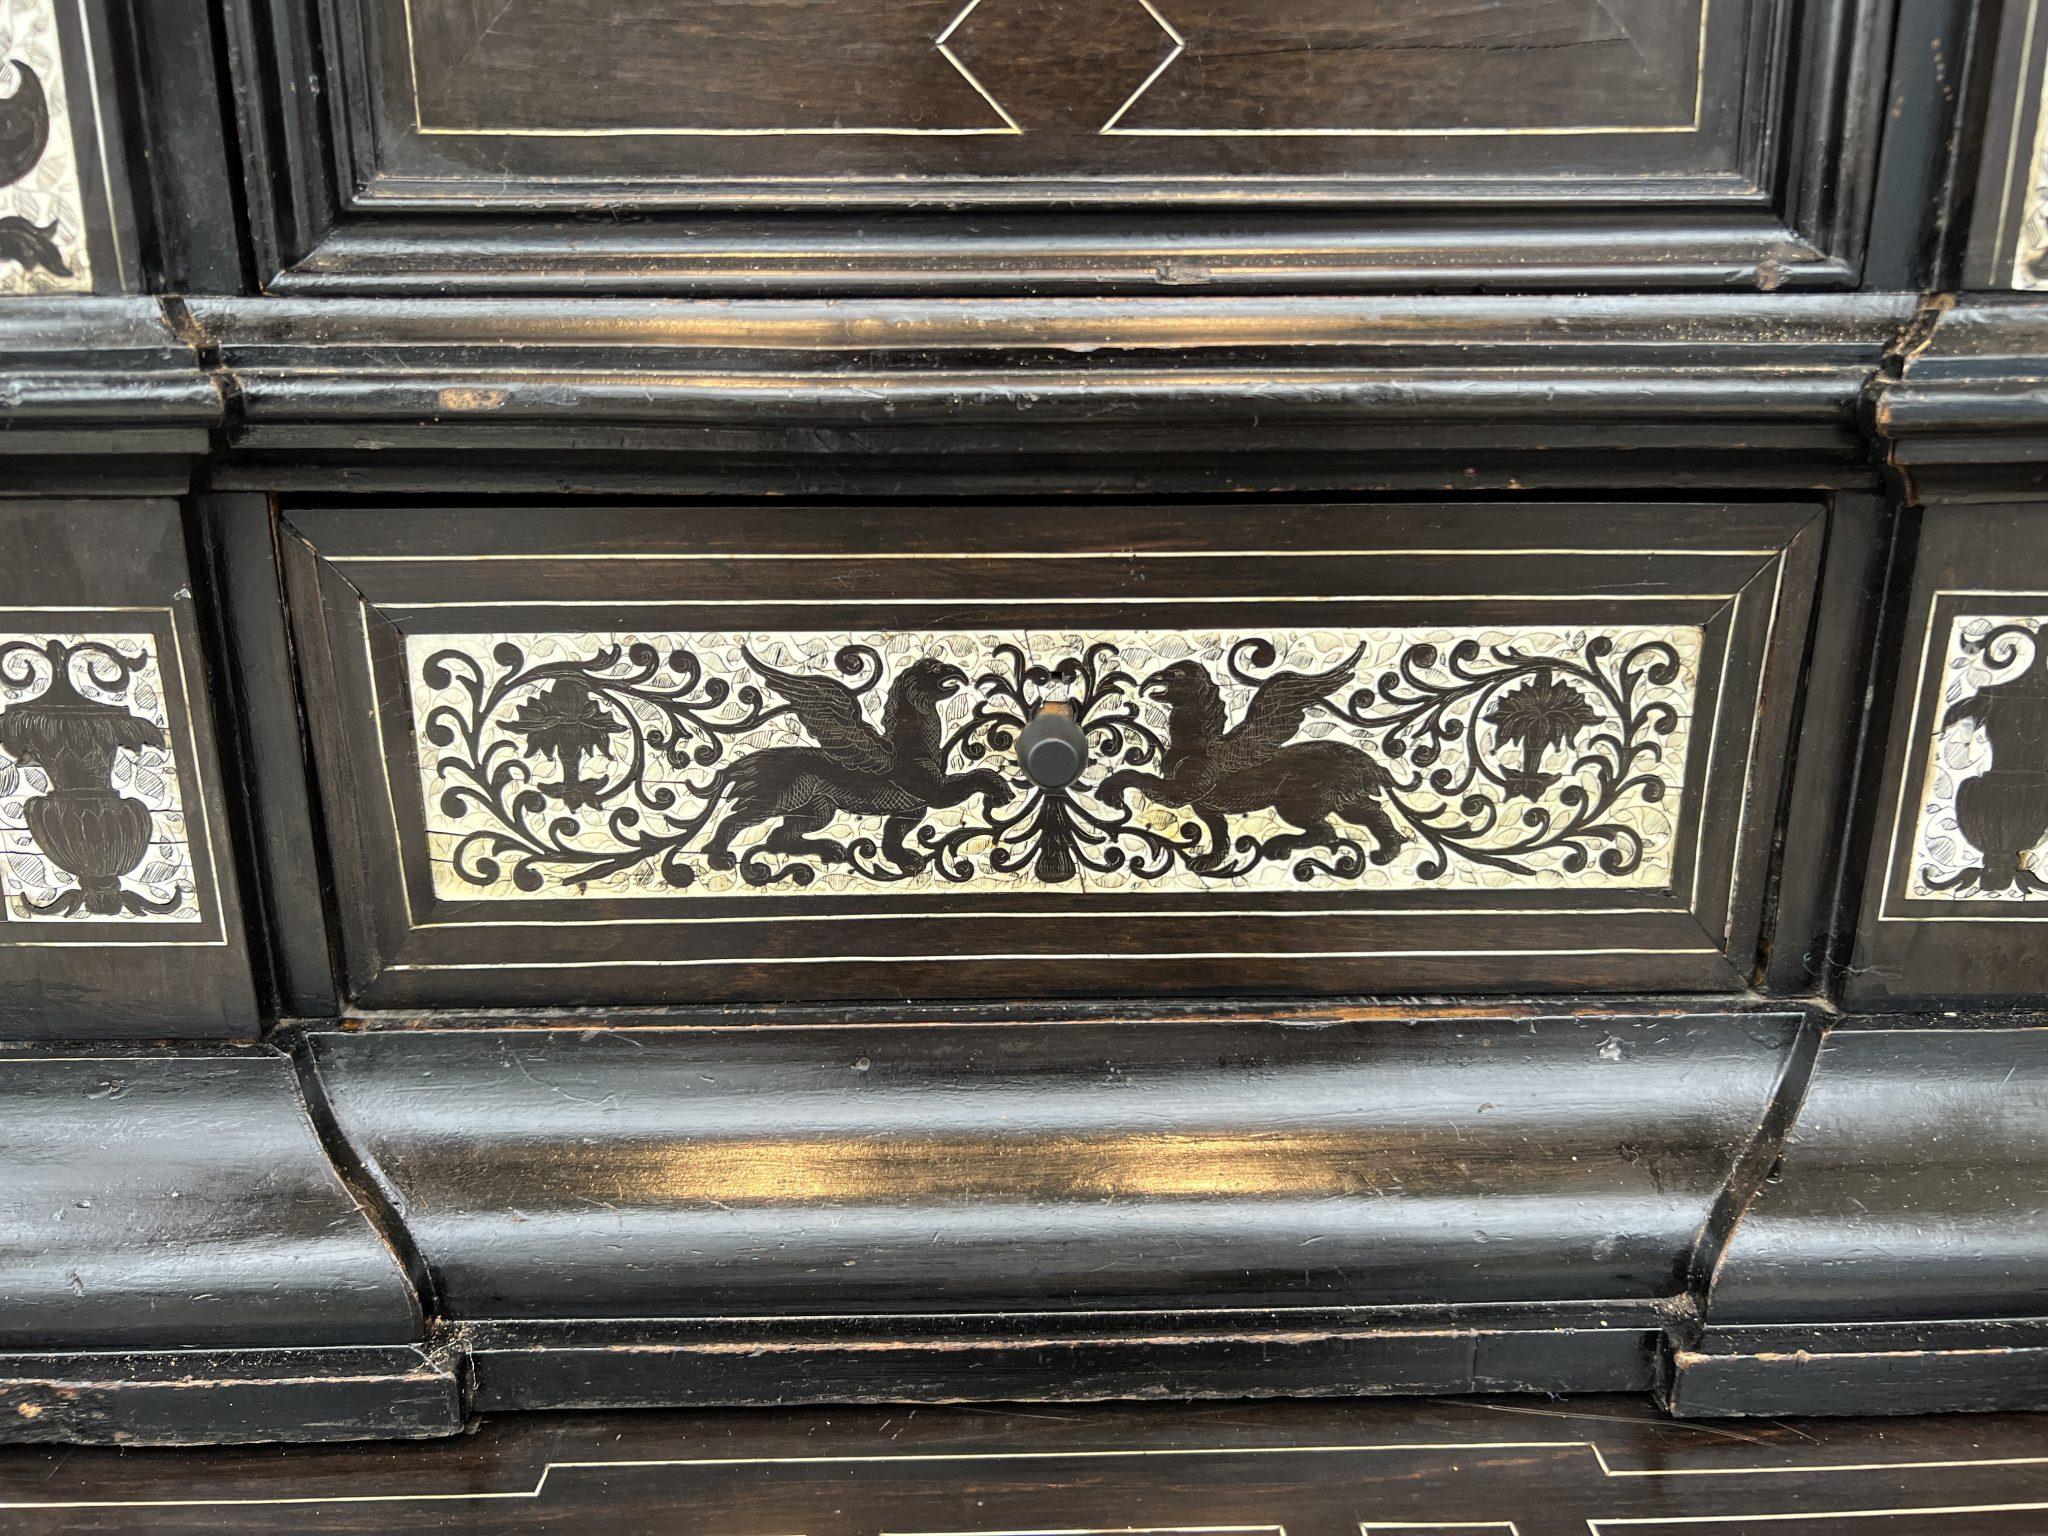 Behold this extraordinary cabinet by Fernando Pogliani from Milan that is a layered fantasia of ebony and bone. The front is intricately worked inlay depicting everything from angels and horses to peacocks and griffons. This is truly a wholly unique